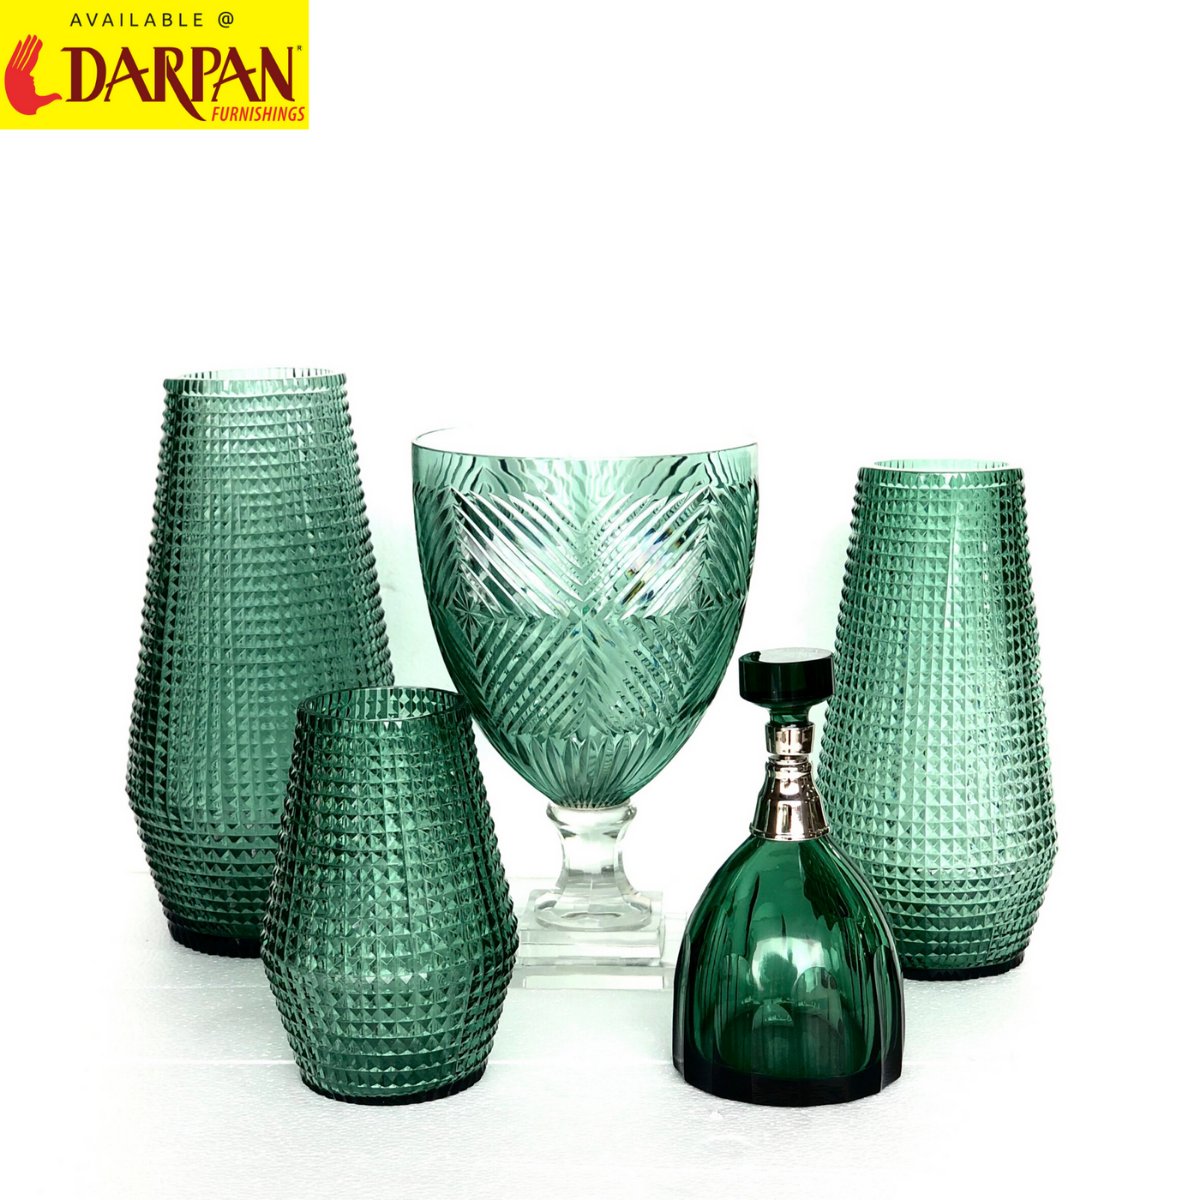 Hand Art #GlassVase Collections! Now available at @Darpan_Furnish stores in #Hyderabad, visit today.

- Know more at bit.ly/32PxR40

#DarpanFurnishings #moderndecor #candleholder #styleyourhome #uniquedecor #artdecor #artifacts #interiordecorating #interiospace